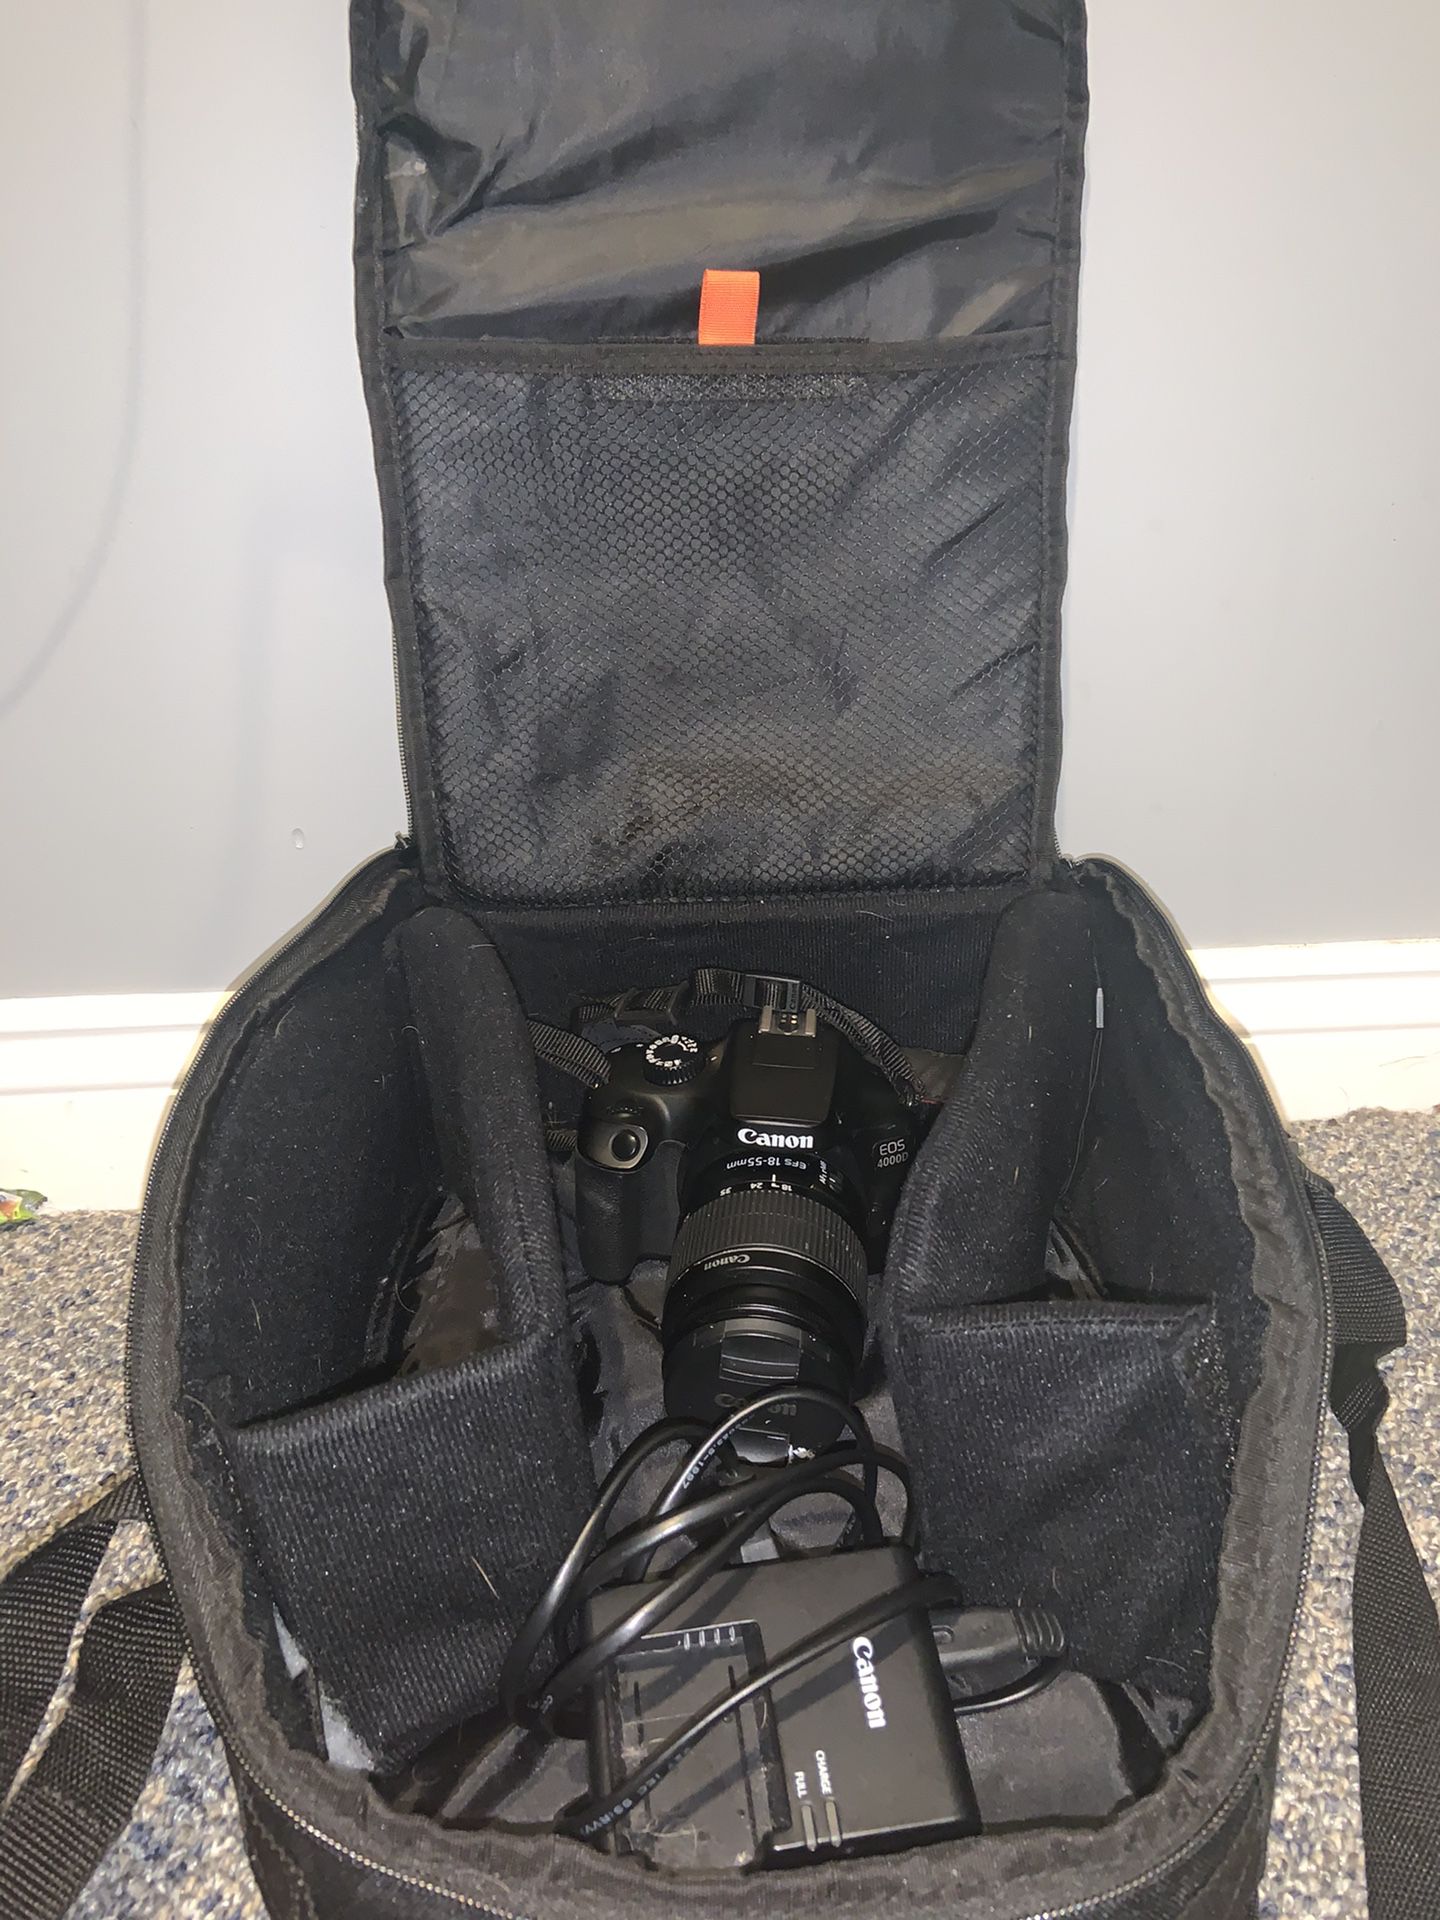 Eos 4000d with charger, battery, kit lens 18-55 and ultimax camera bag